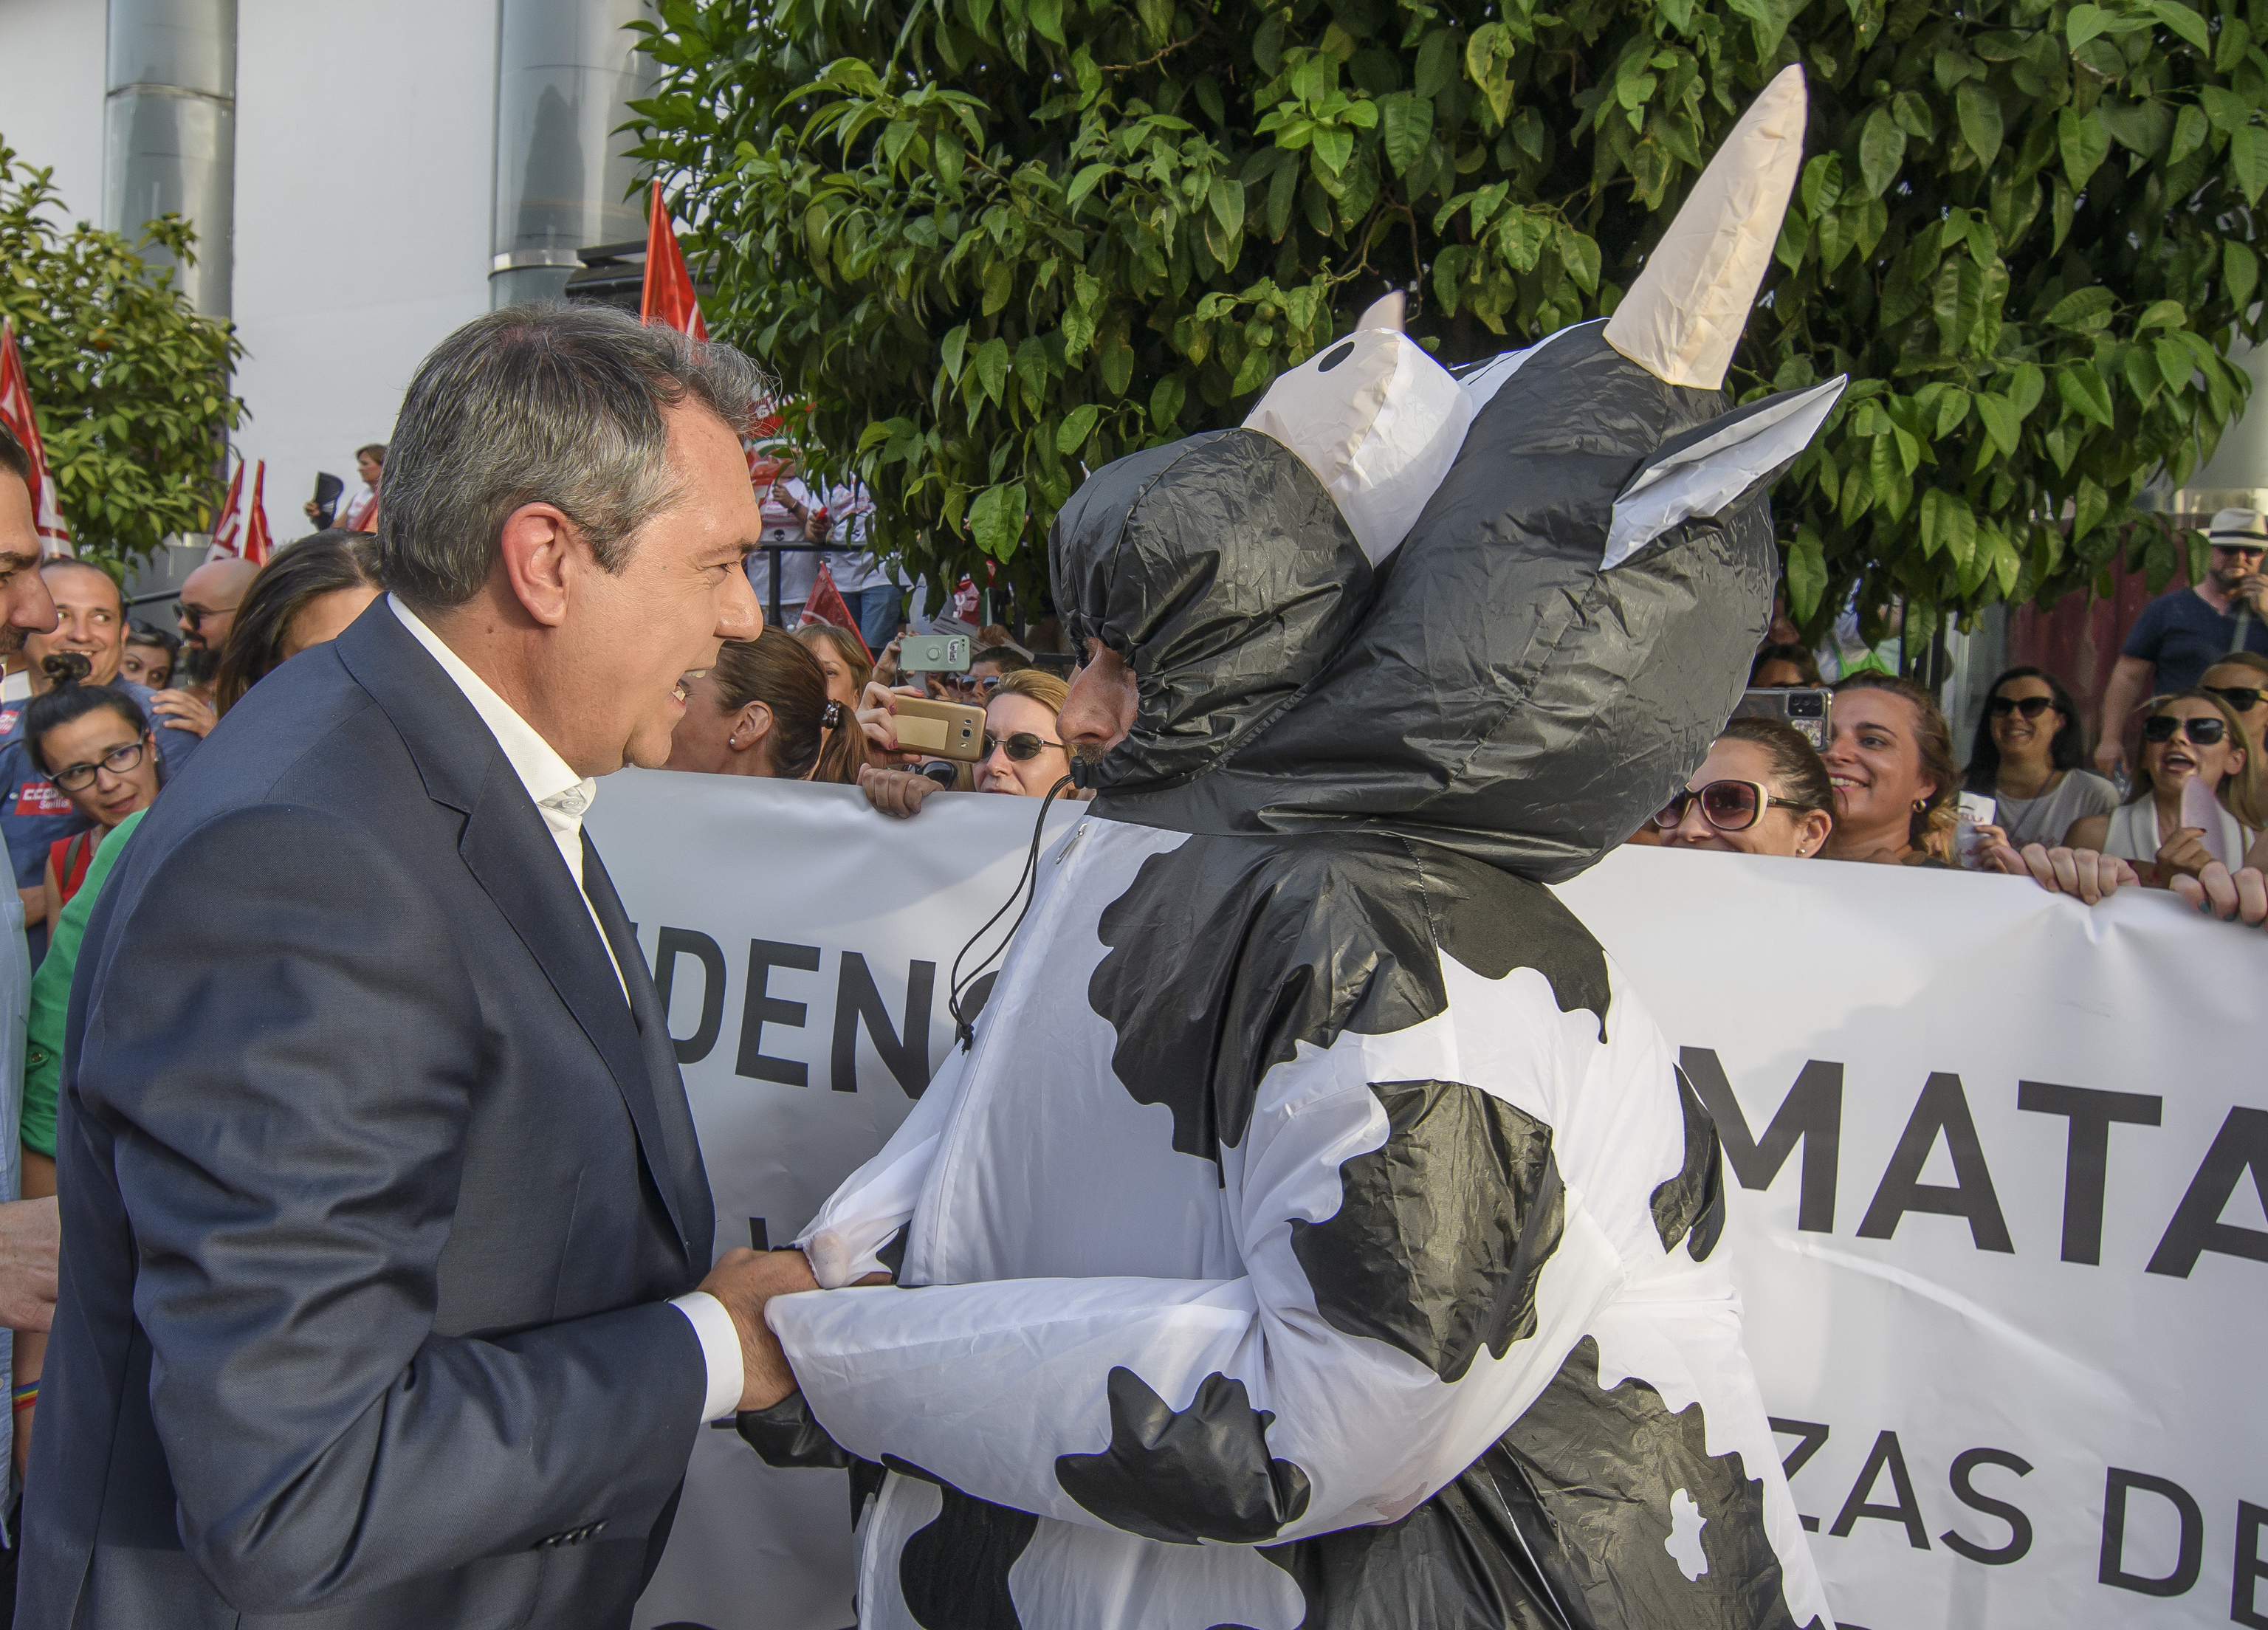 Juan Espadas talks with a protester dressed as a cow before an argument.